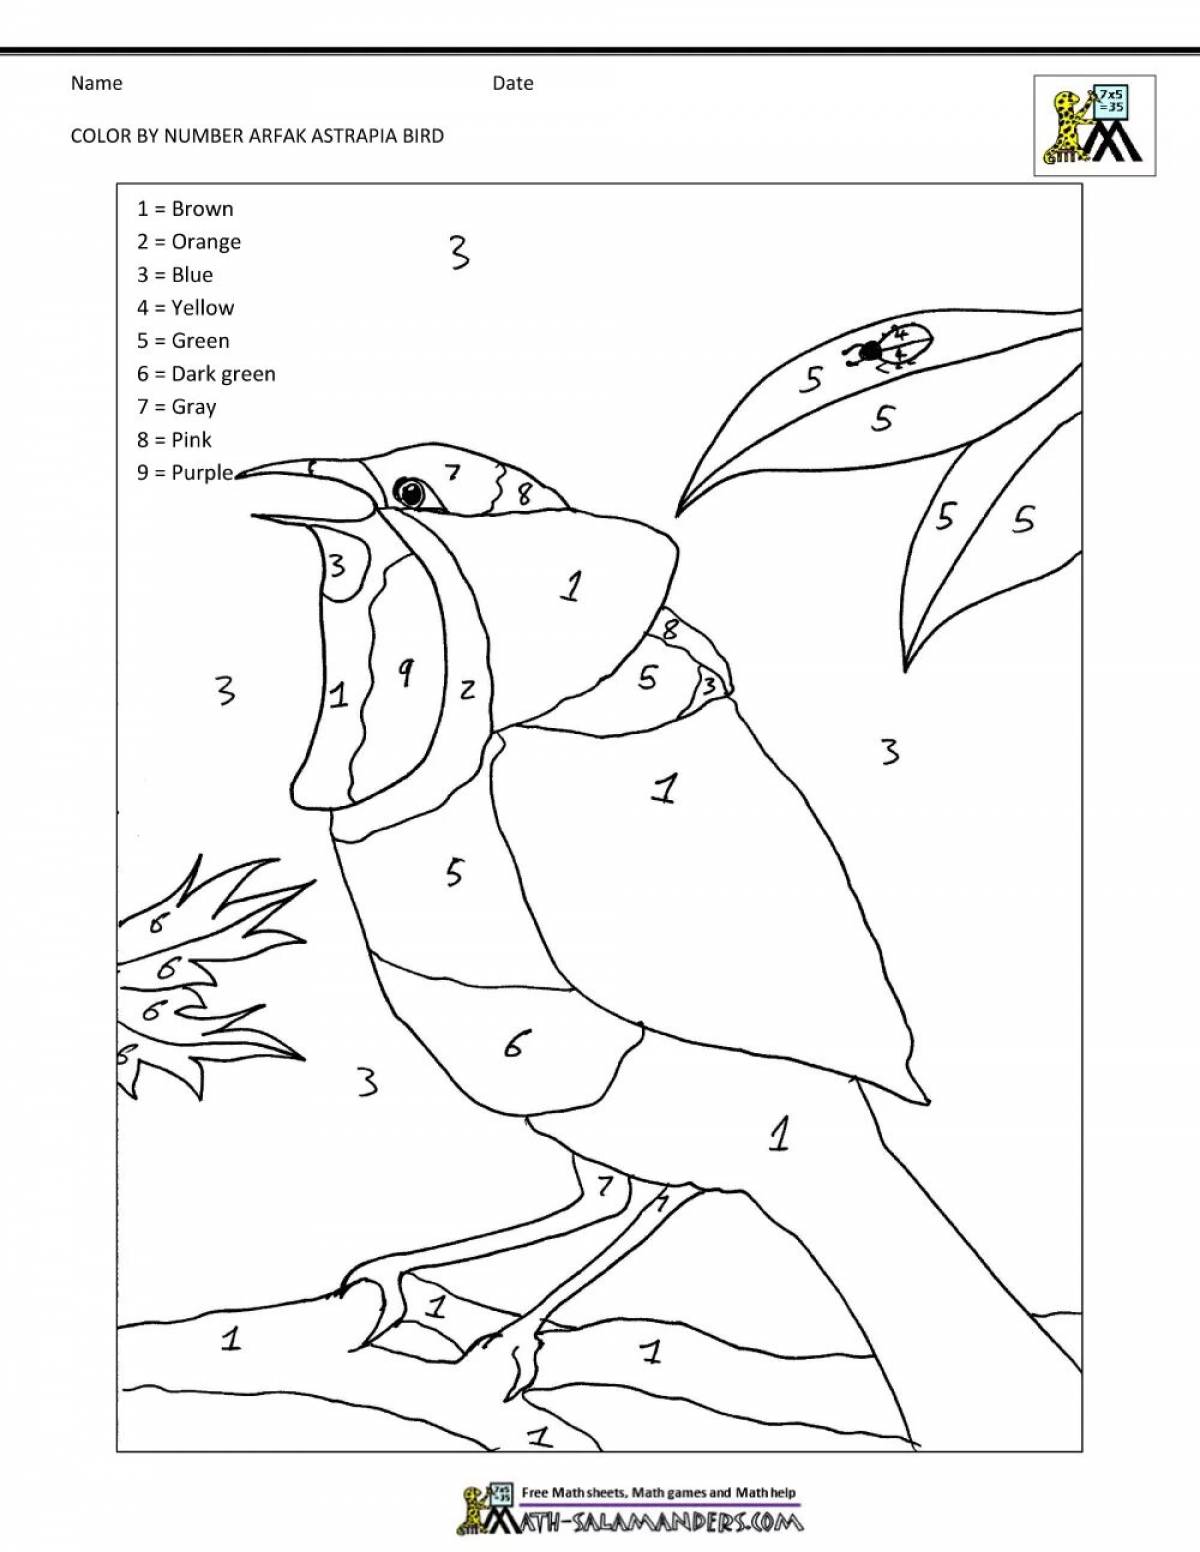 Coloring radiant parrot by numbers